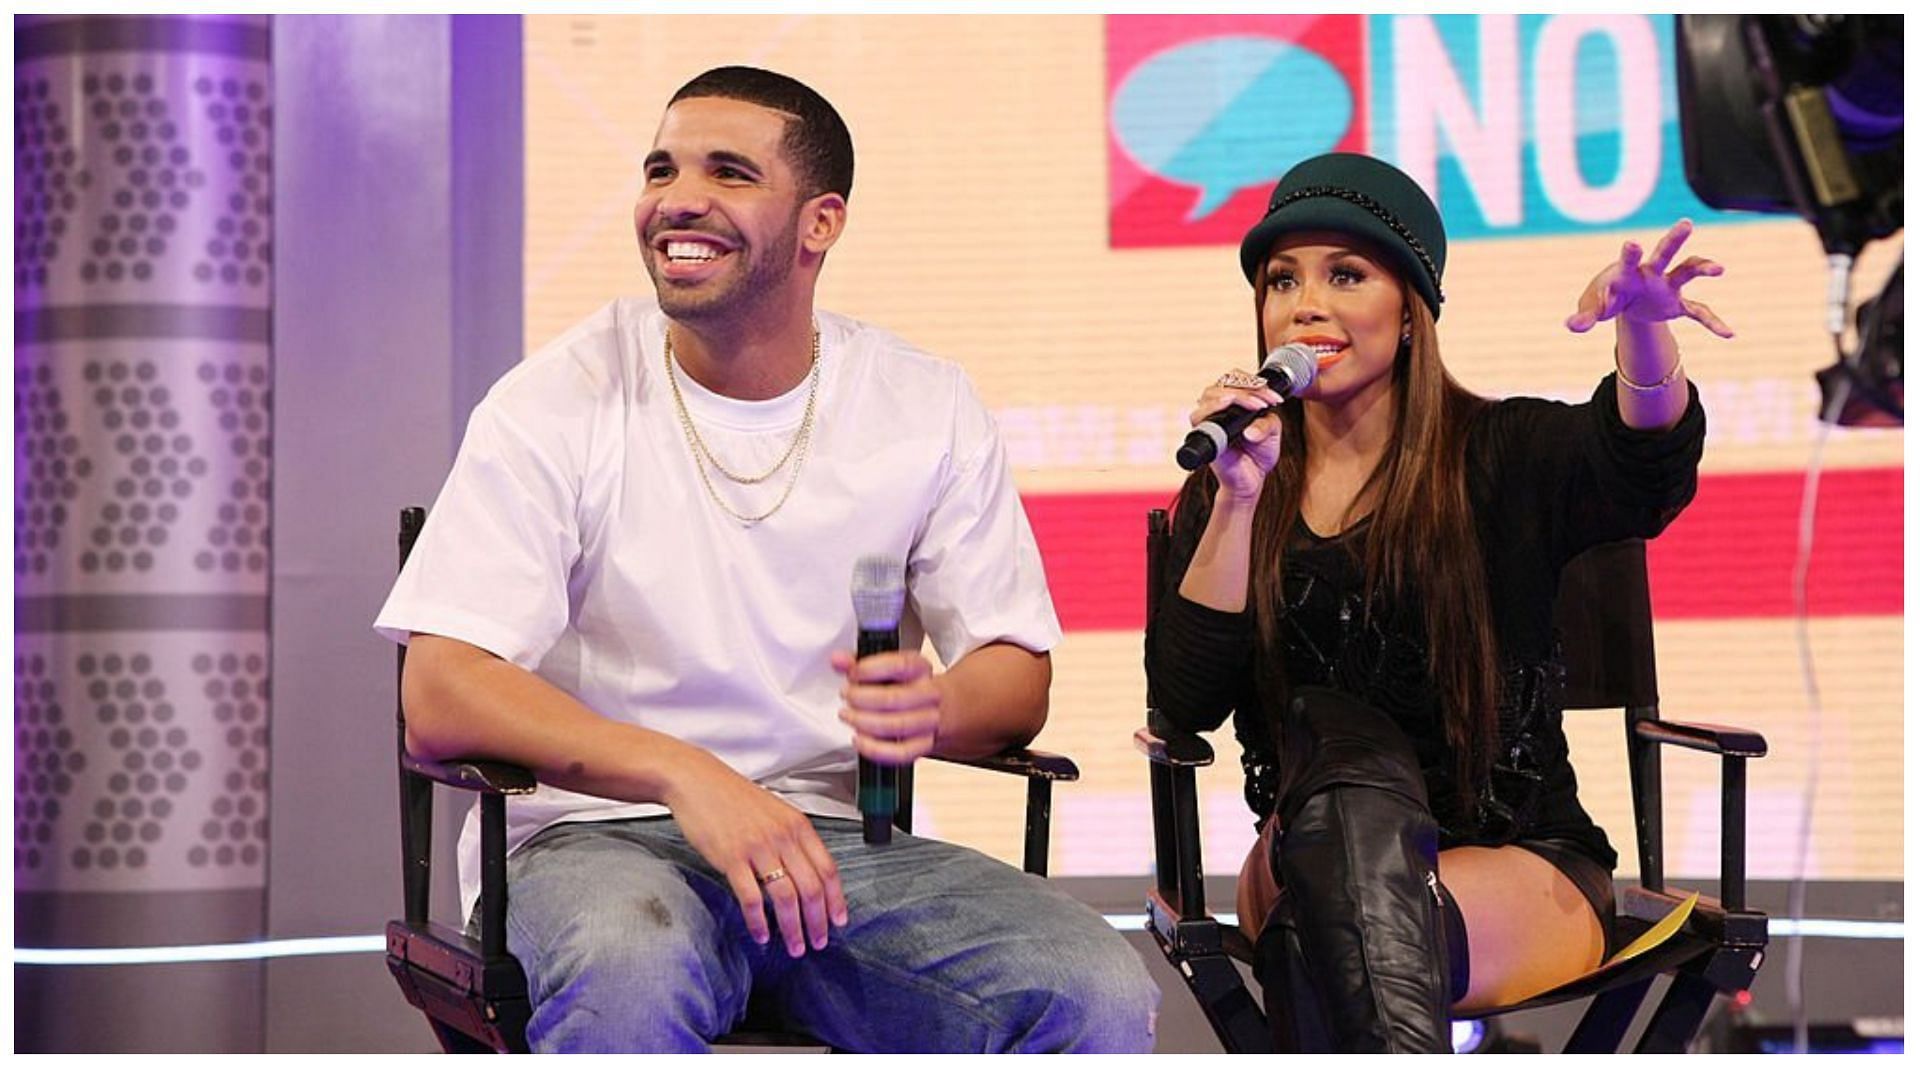 Drake and Keshia Chante recently reunited at an event (Image via Bennett Raglin/Getty Images)